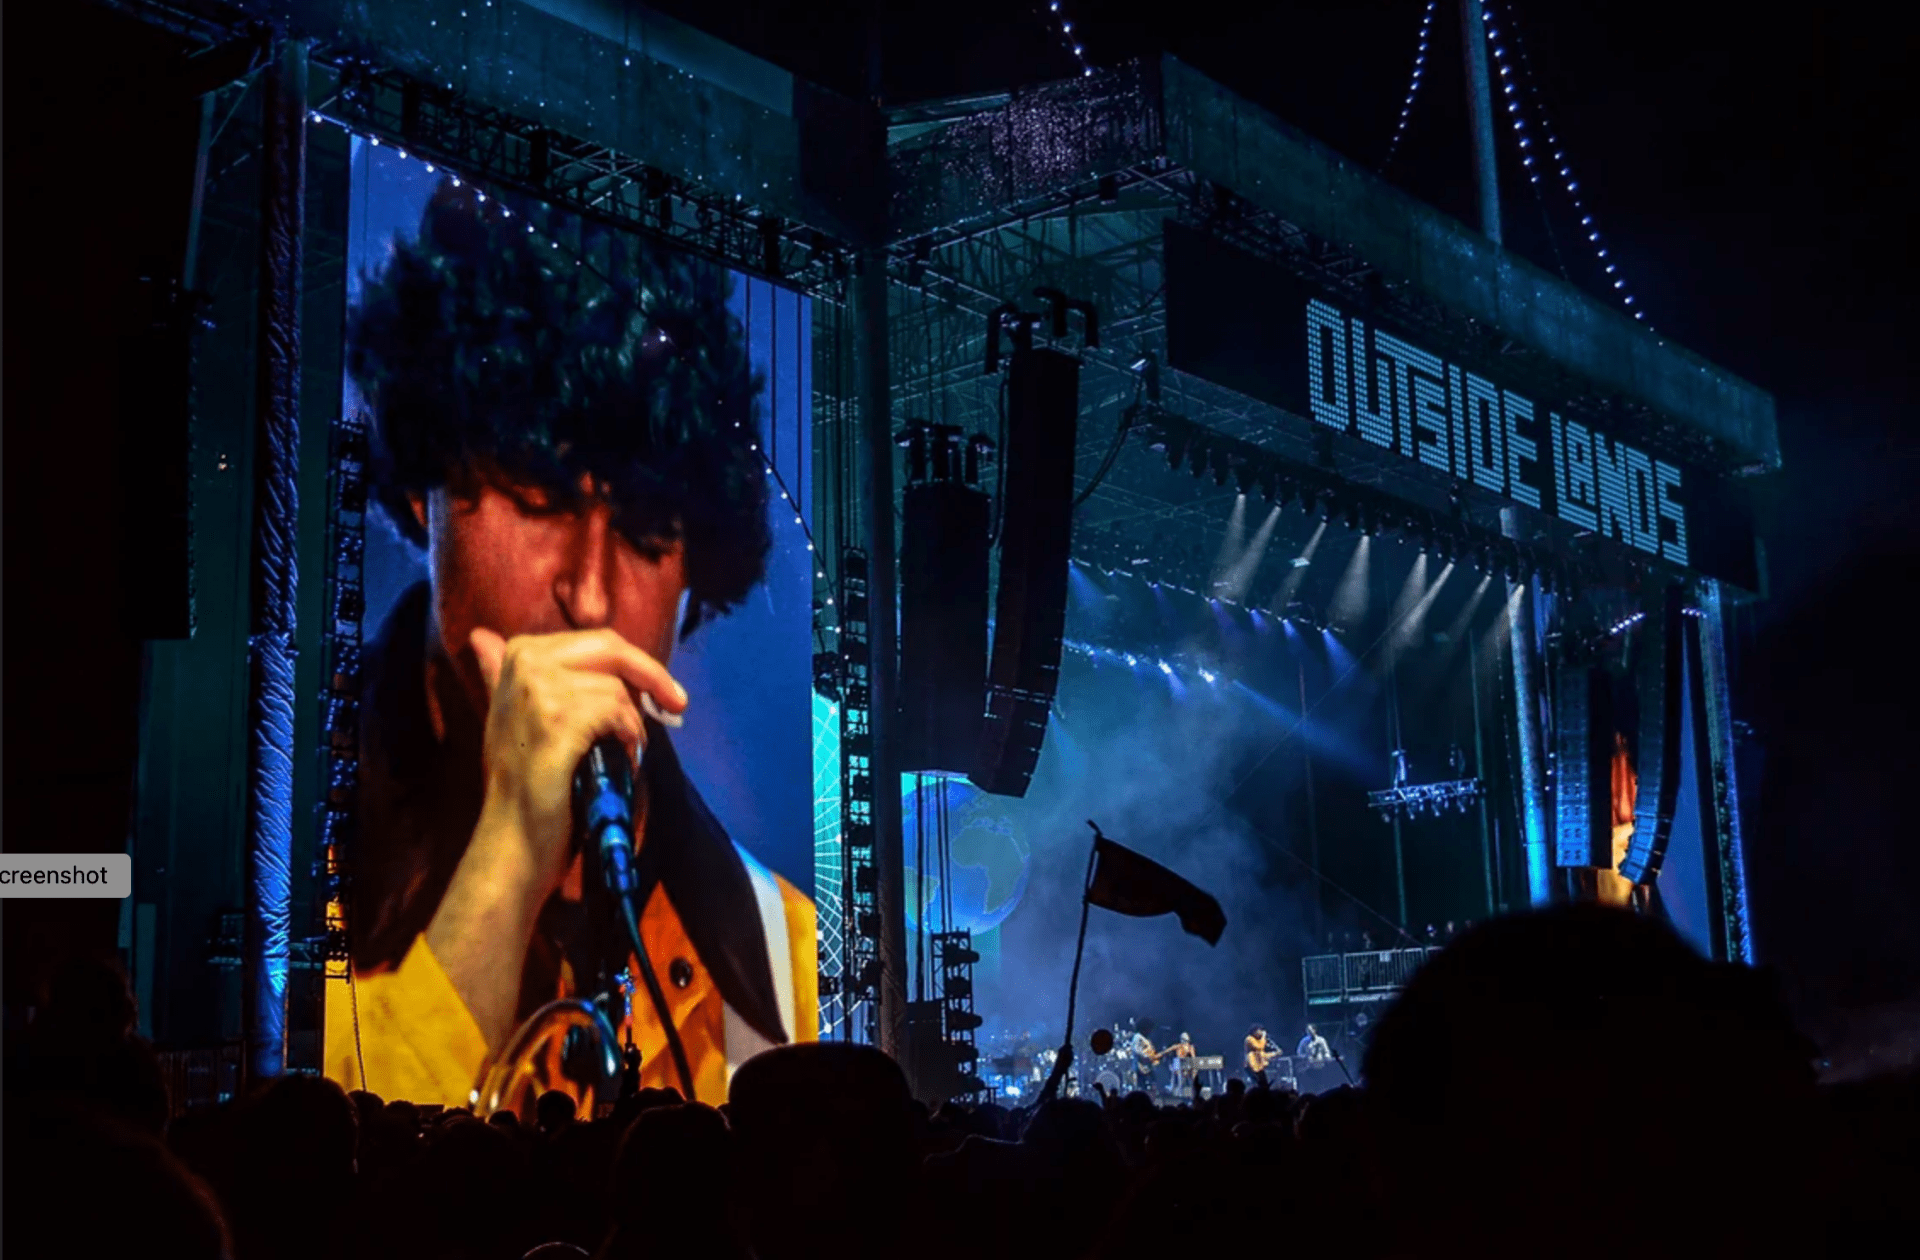 a close up of a singer on a video screen next to a large outdoor stage